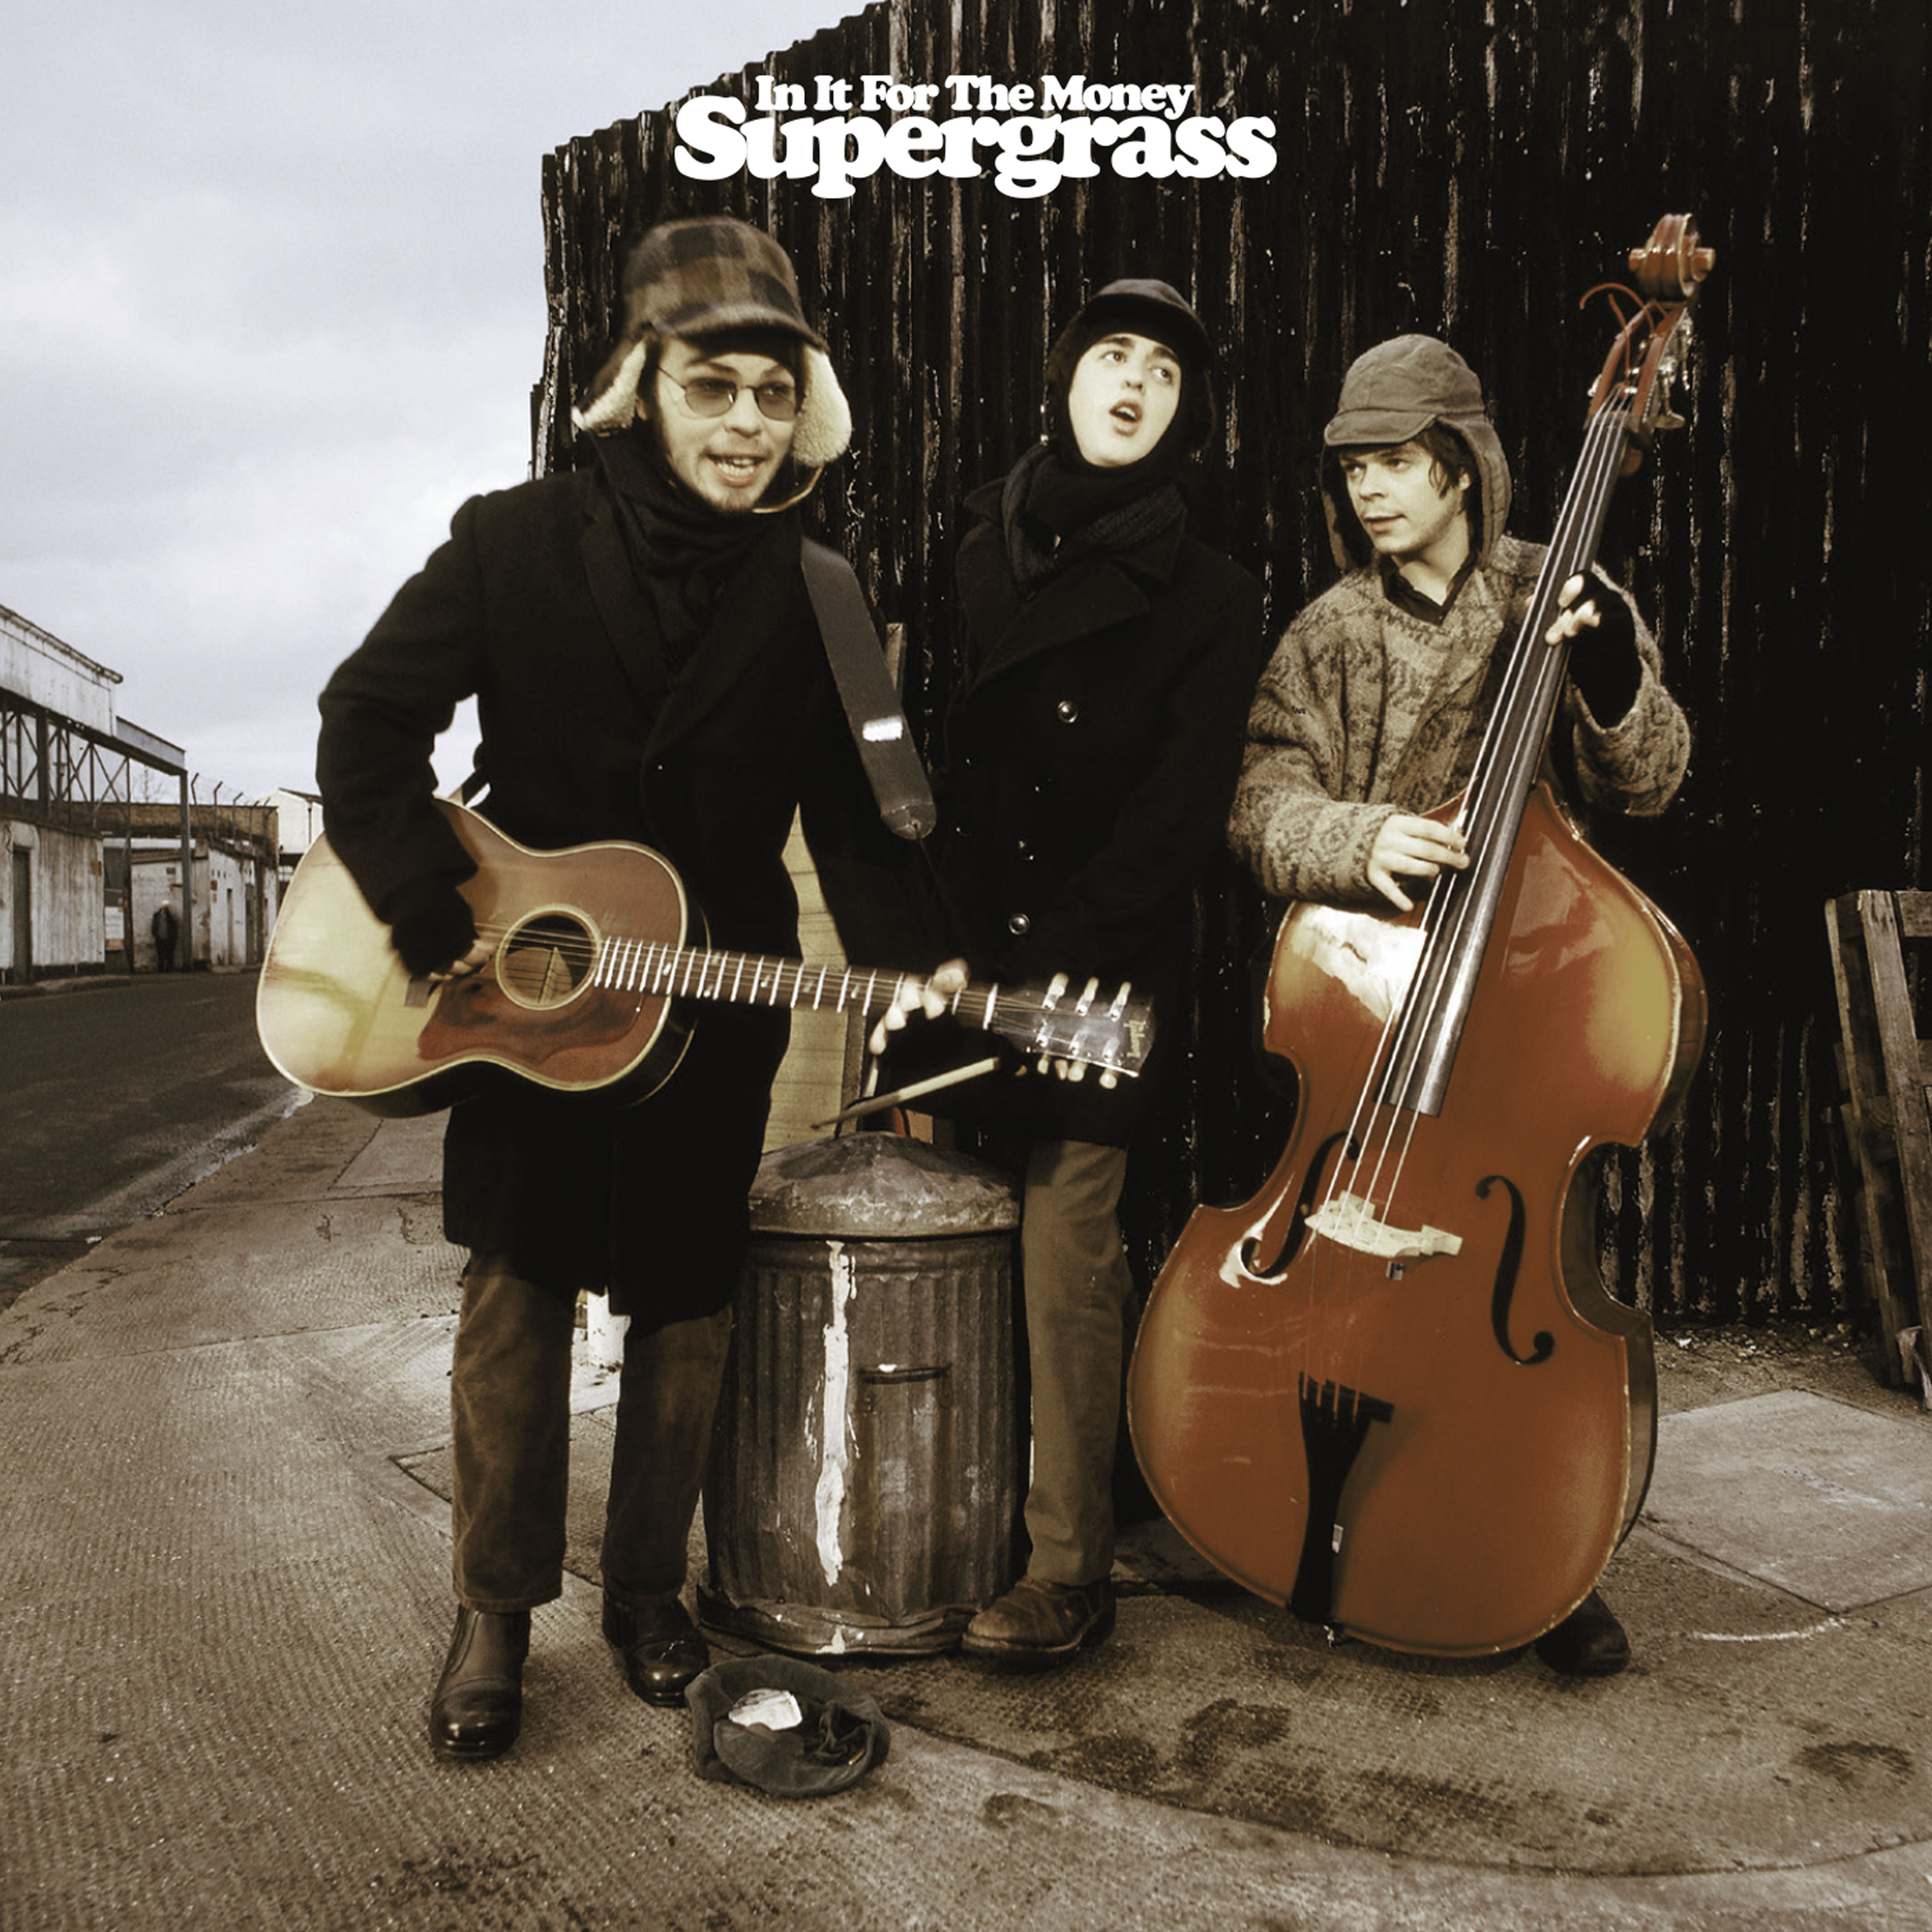 Supergrass - In It for the Money (2021 Remaster) (1997/2021) [FLAC 24bit/96kHz]